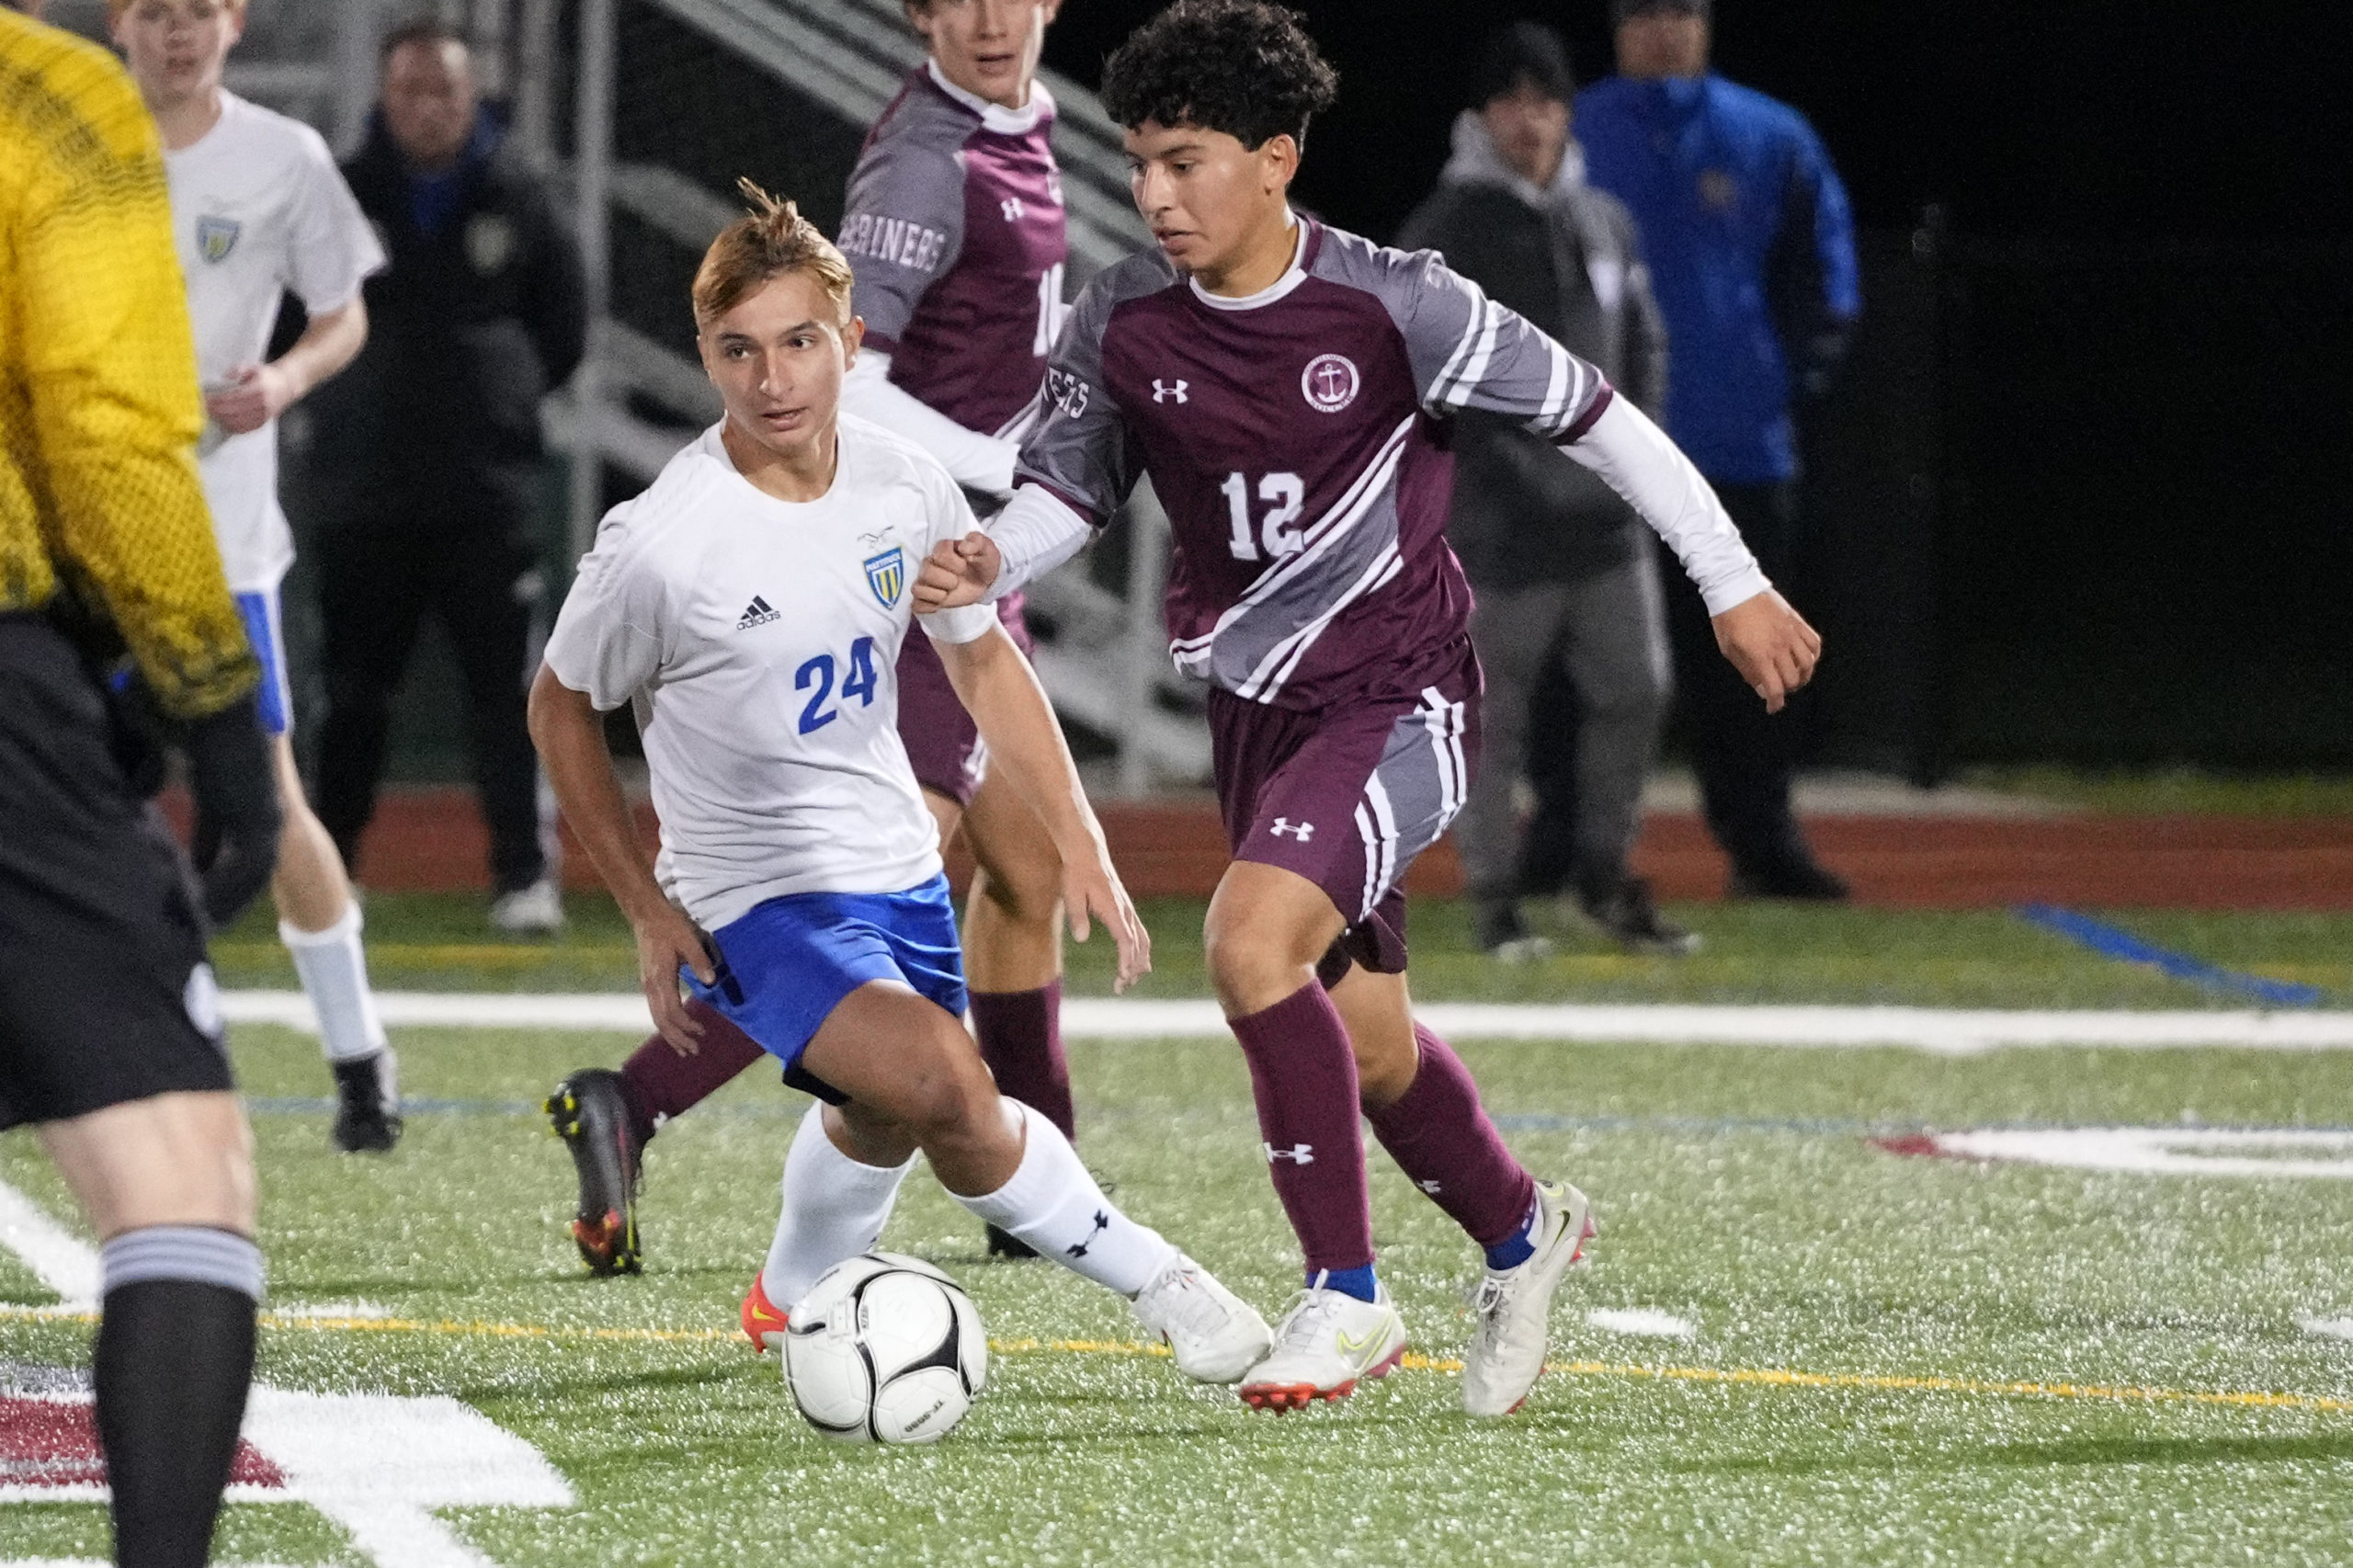 Southampton sophomore Danny Bustamante looks to push the ball forward.